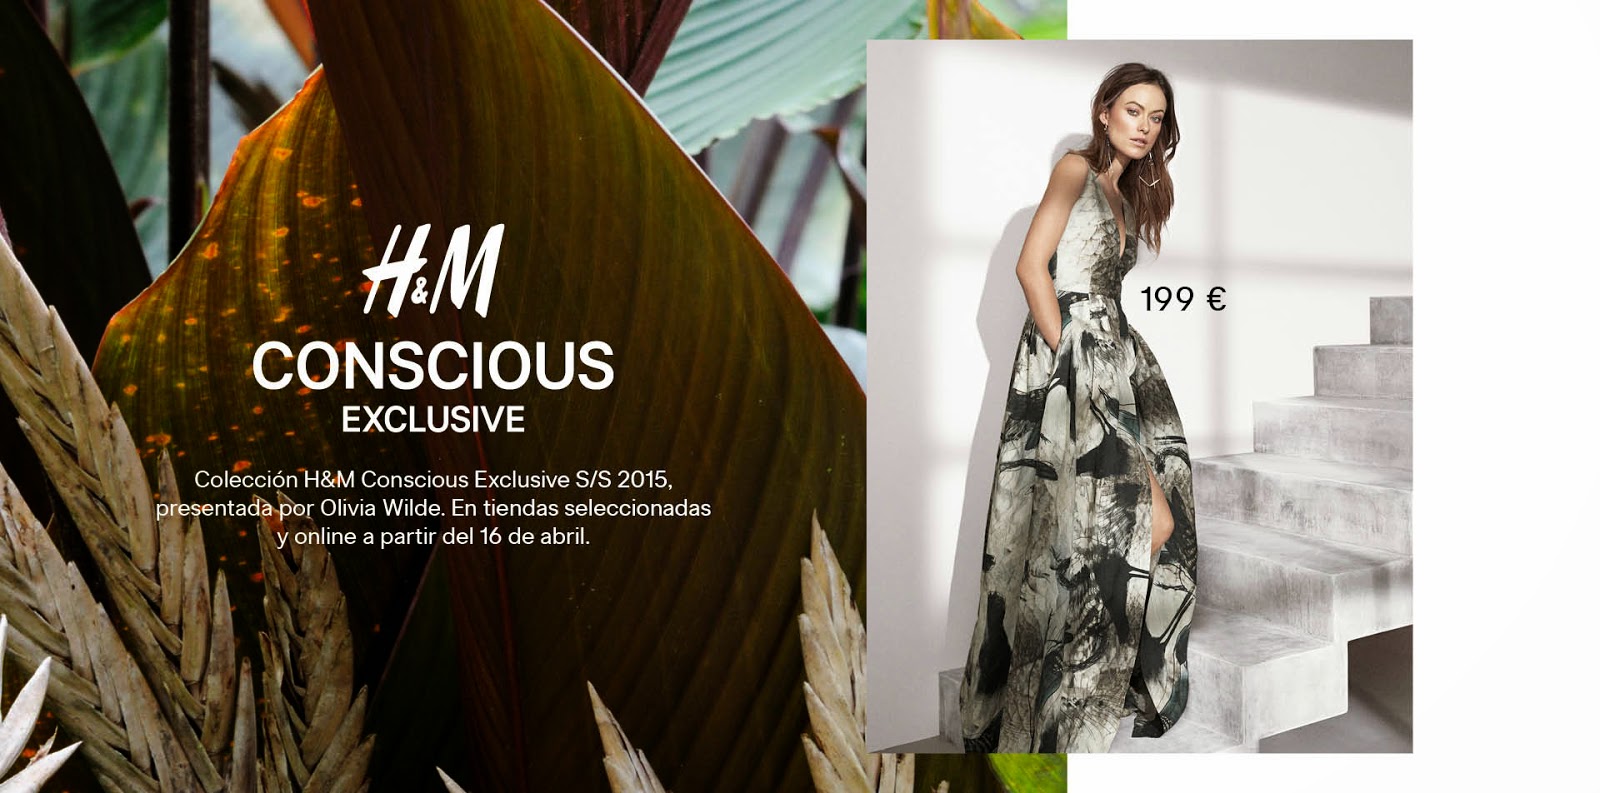 H&M CONSCIOUS EXCLUSIVE COLLECTION